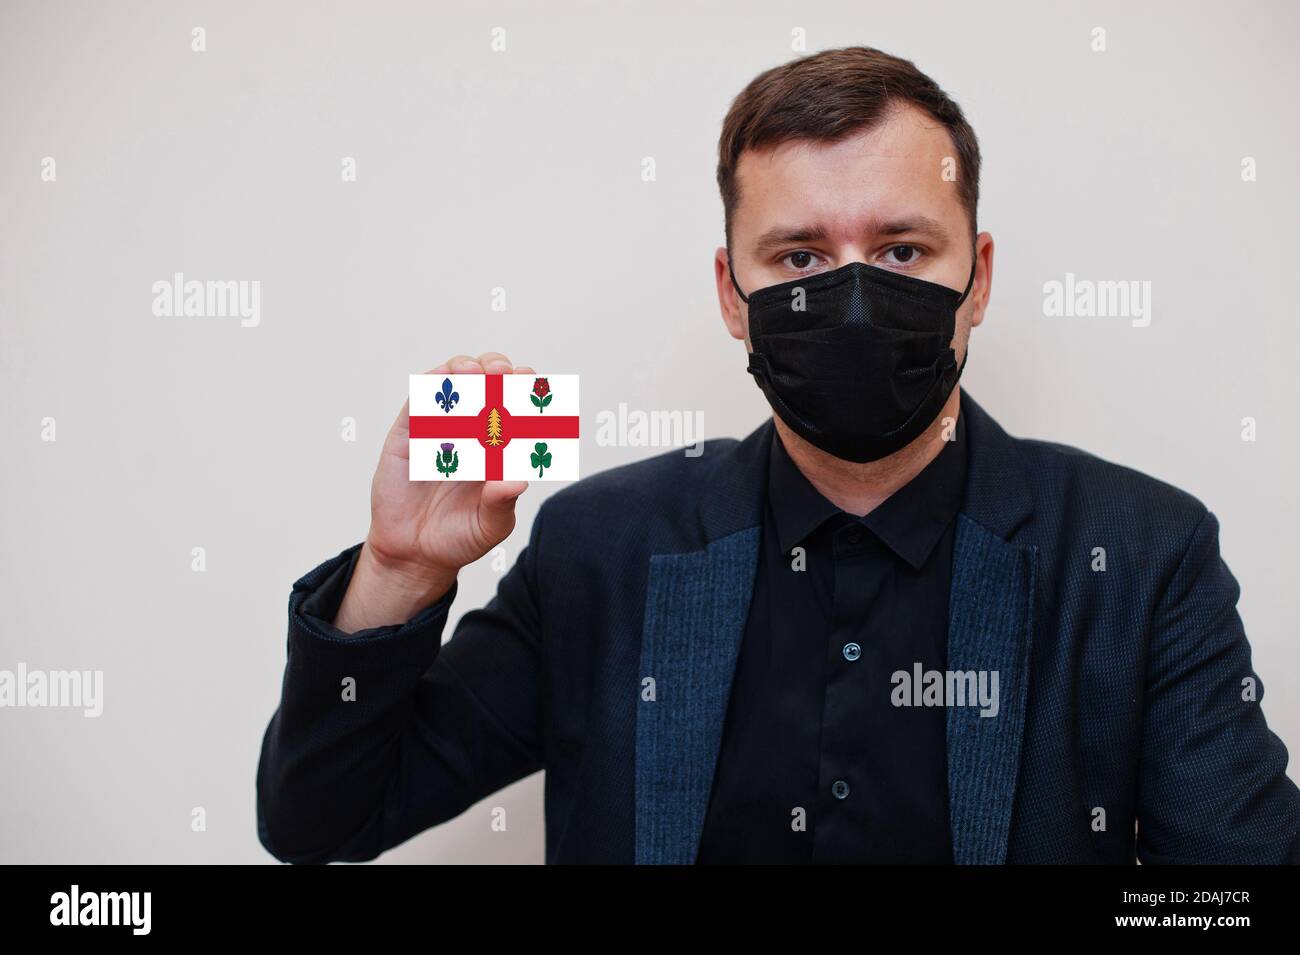 Man wear black formal and protect face mask, hold Montreal flag card isolated on white background. Canada cities coronavirus Covid concept. Stock Photo